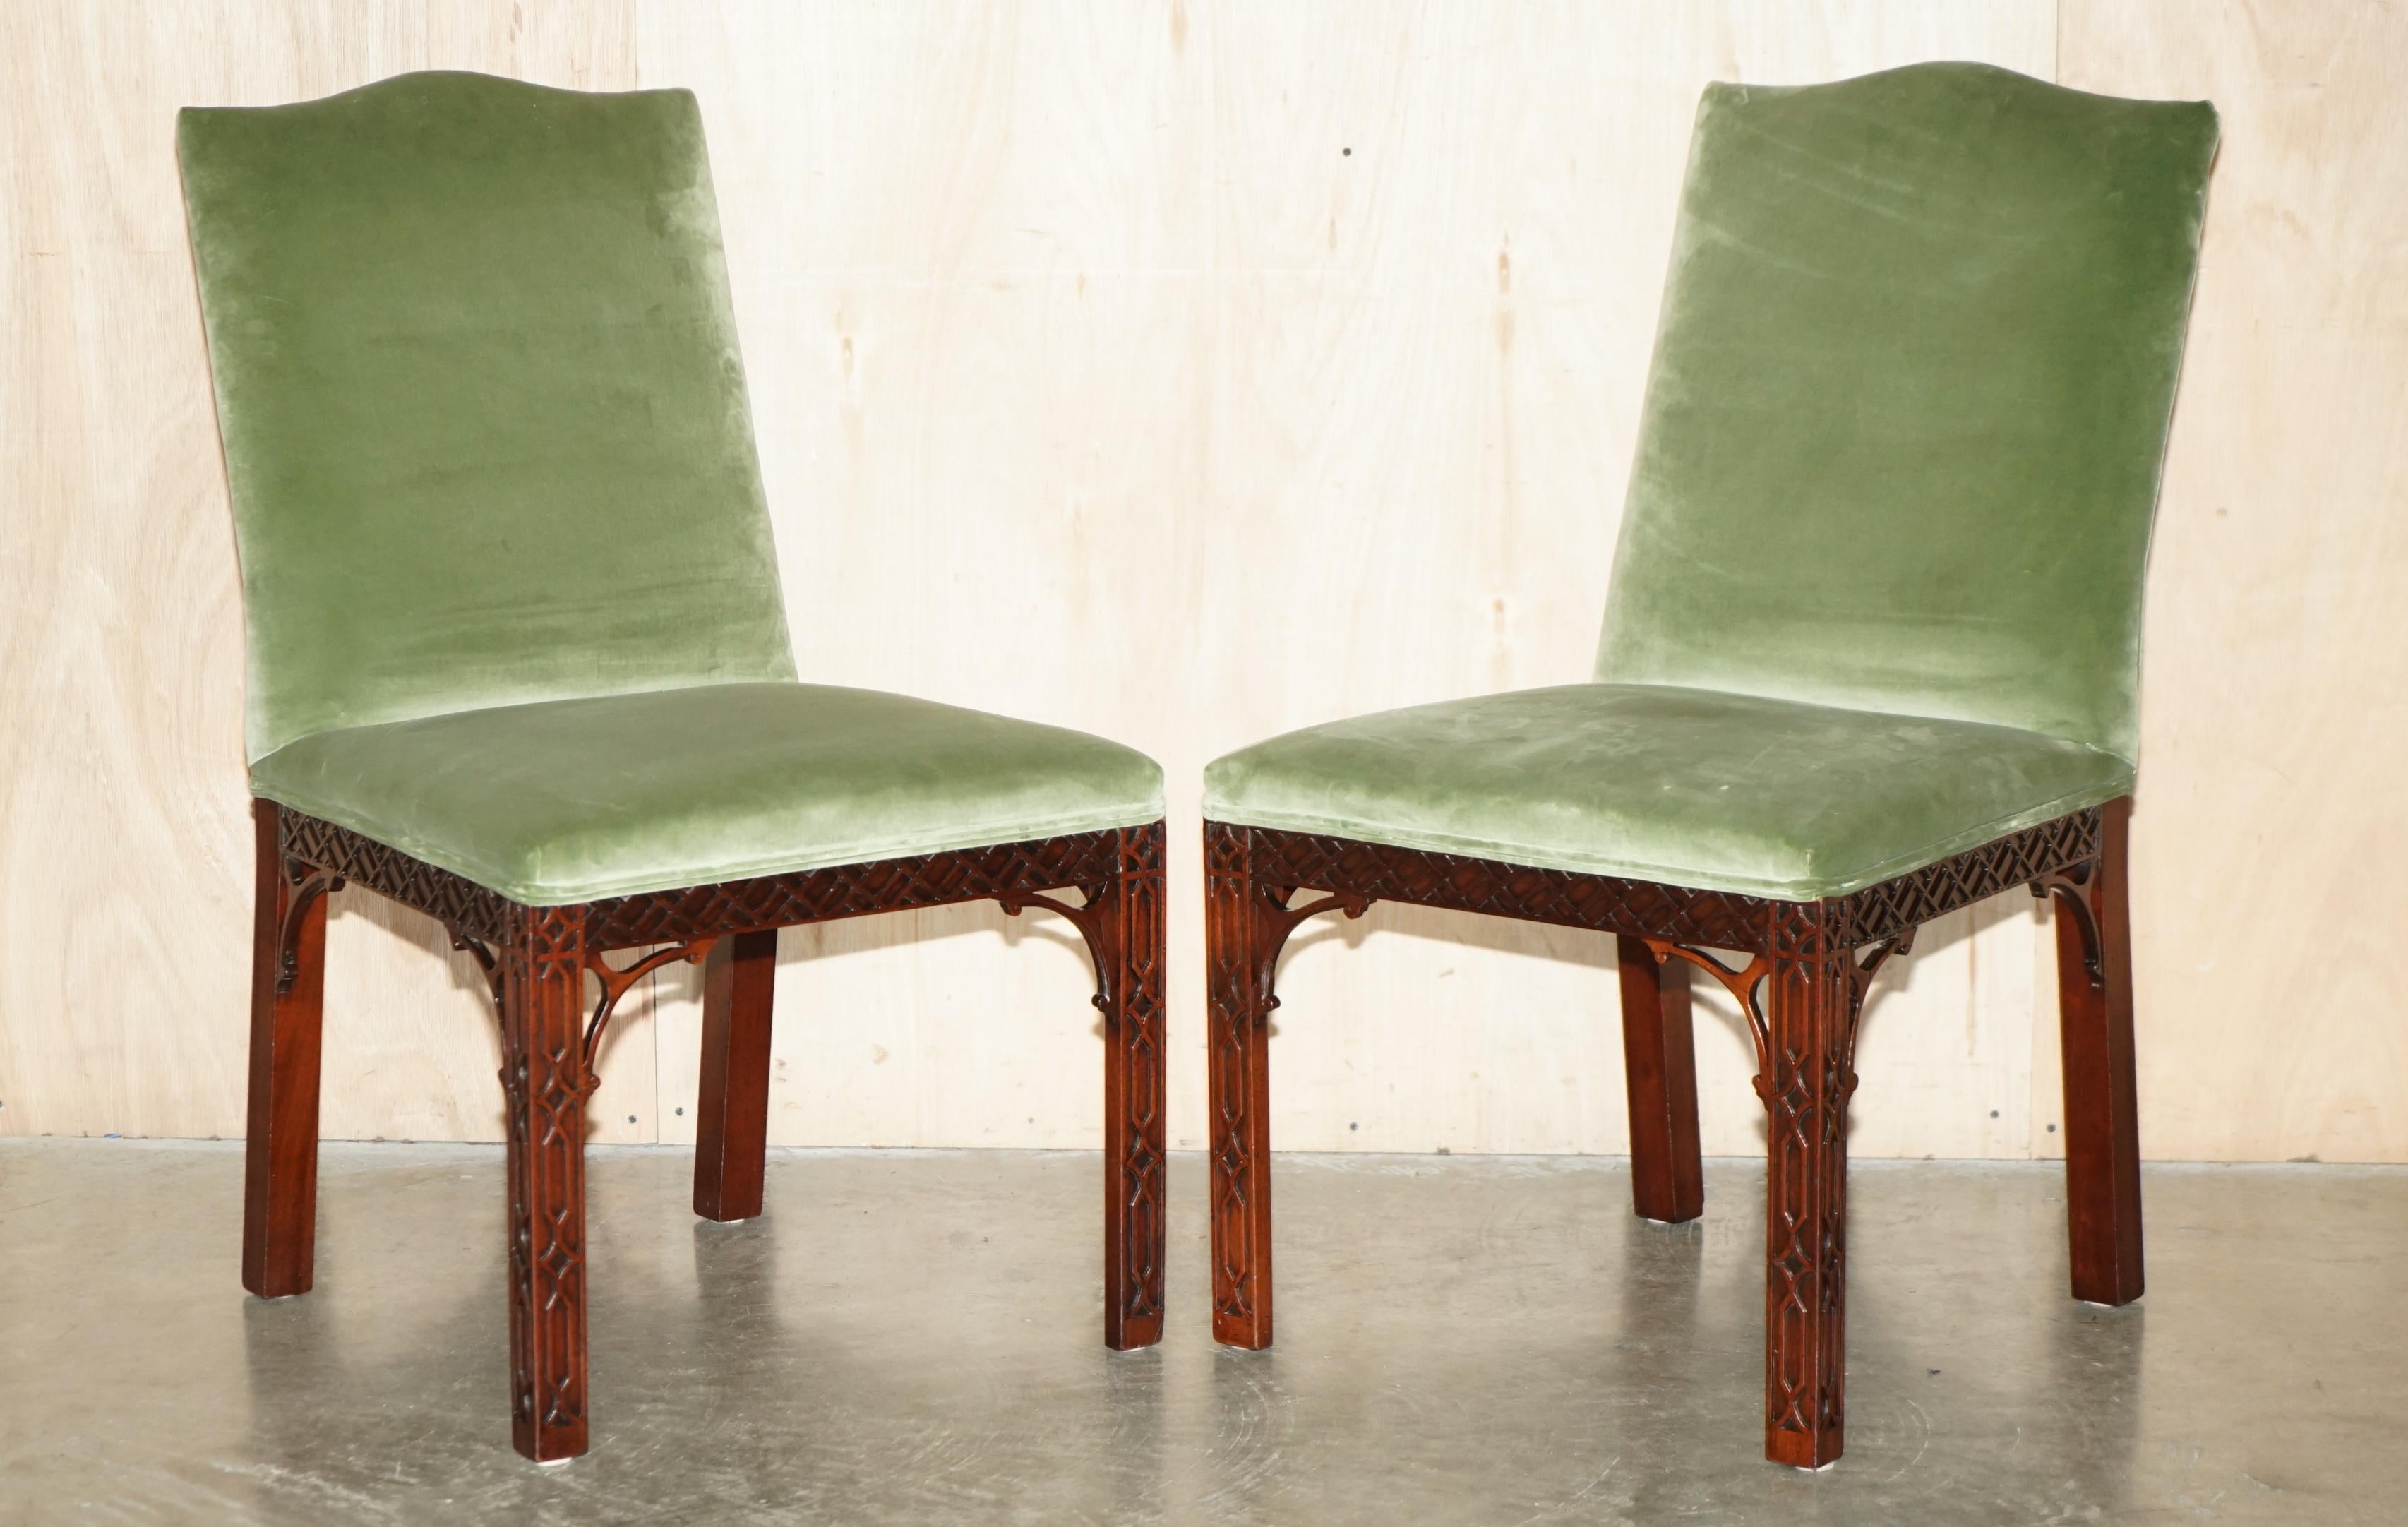 Royal House Antiques

Royal House Antiques is delighted to offer for sale this stunning pair of Victorian hand carved Thomas Chippendale style side chairs in heavy mahogany circa 1880

Please note the delivery fee listed is just a guide, it covers